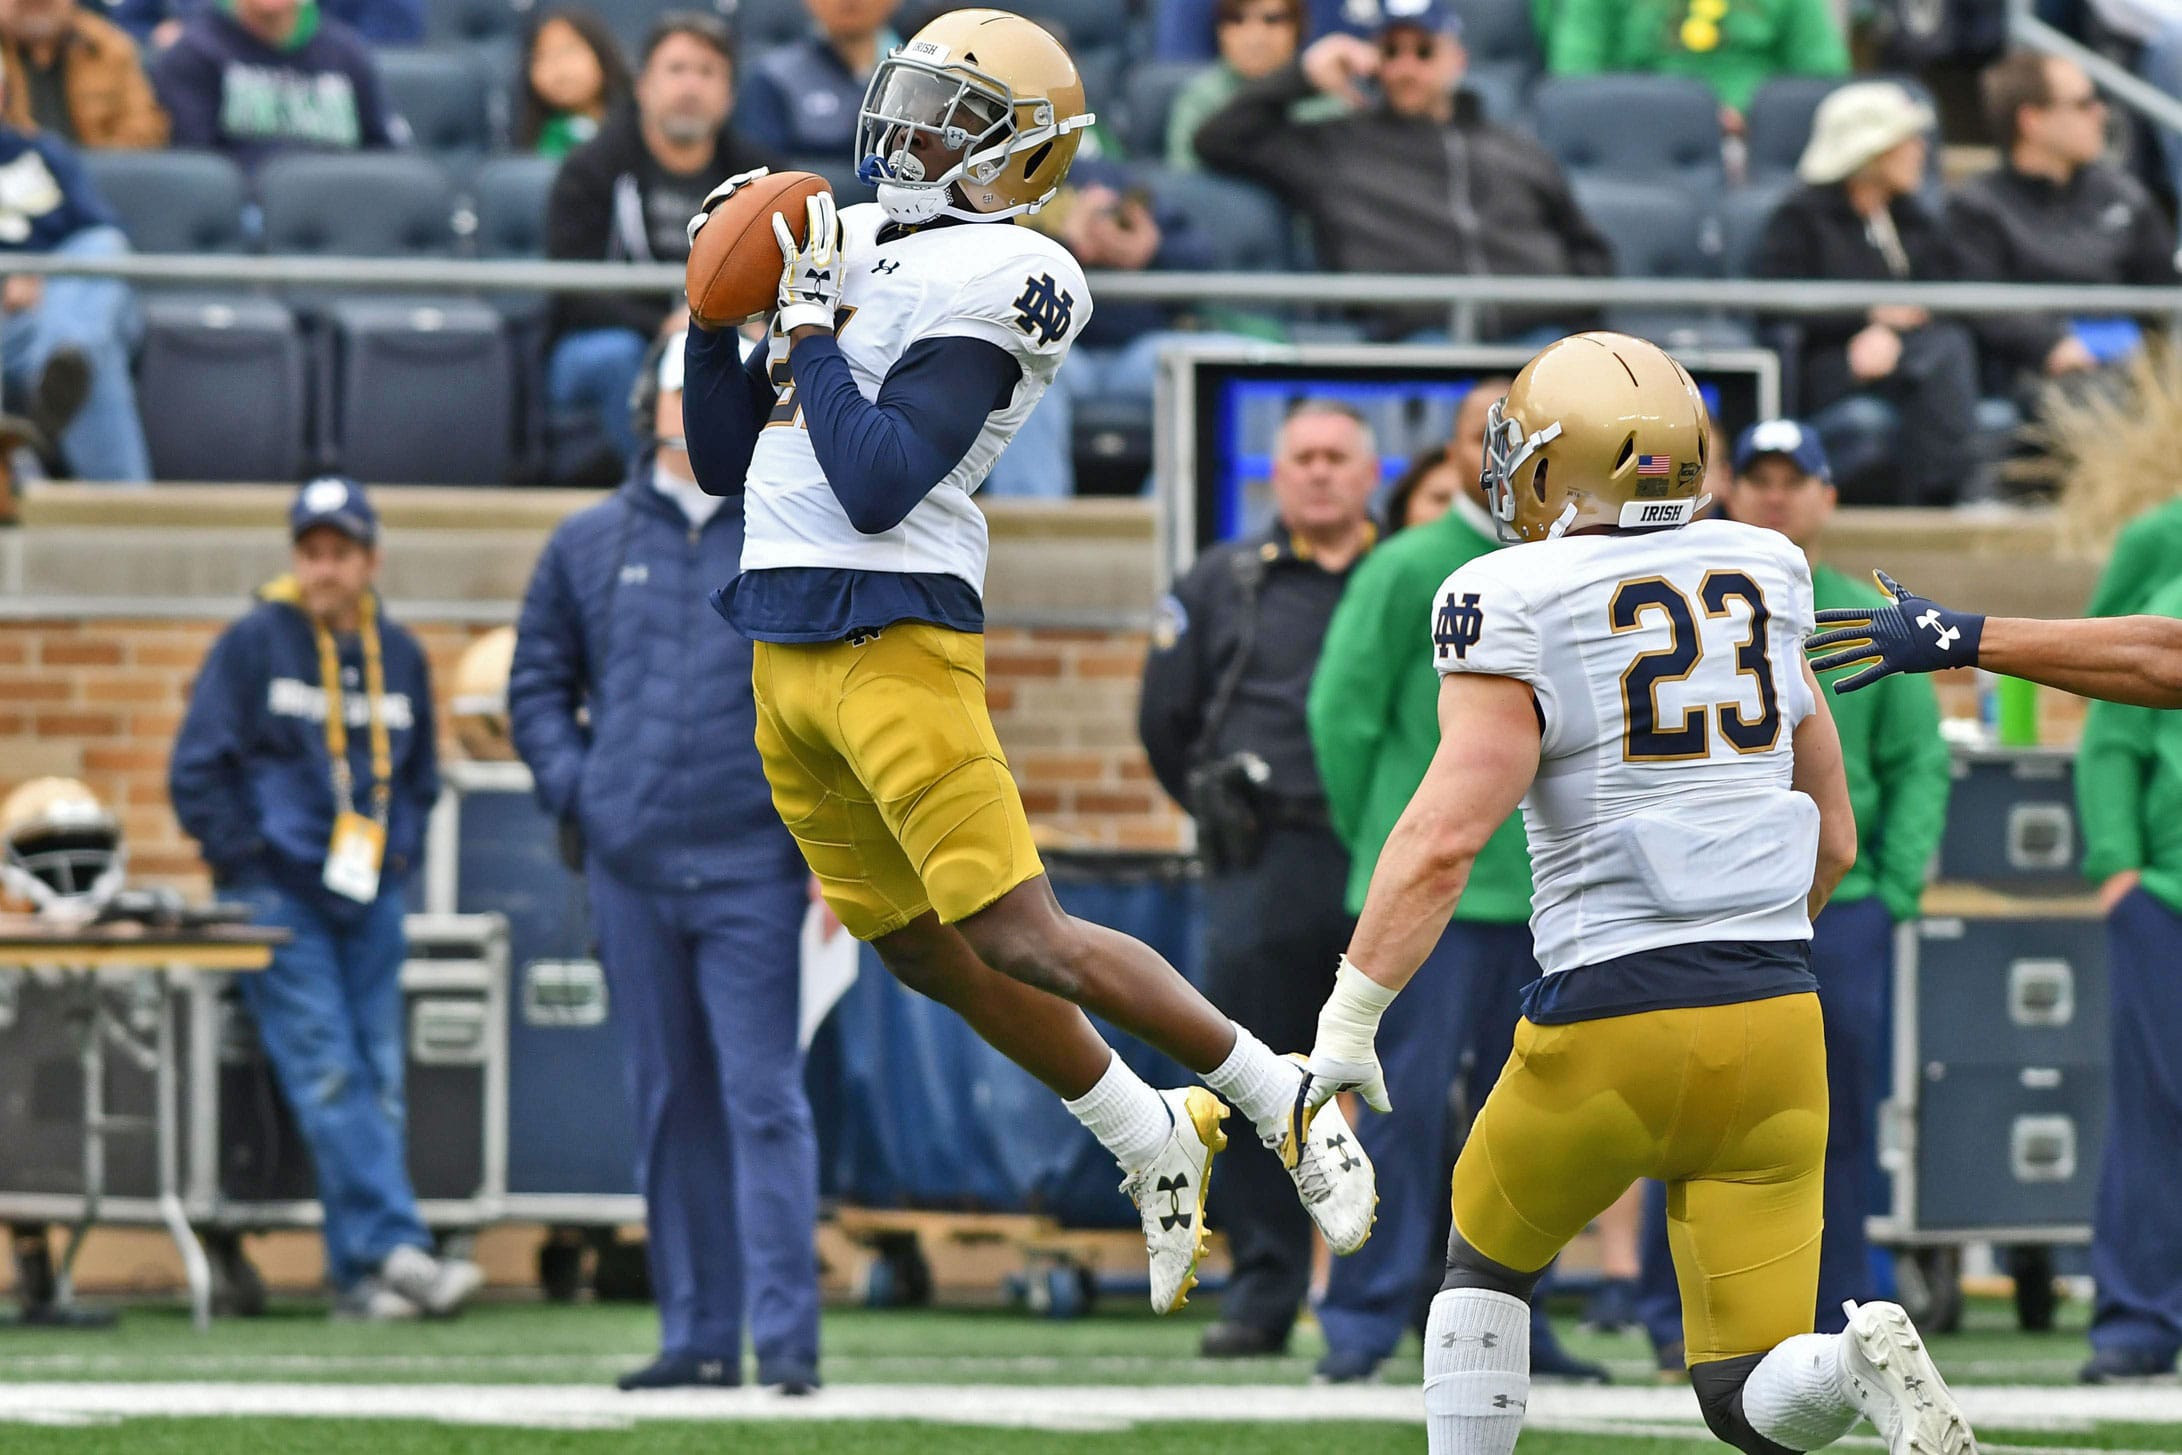 Notre Dame Football Fall Camp 2018: What To Watch For on Defense // UHND.com2182 x 1455